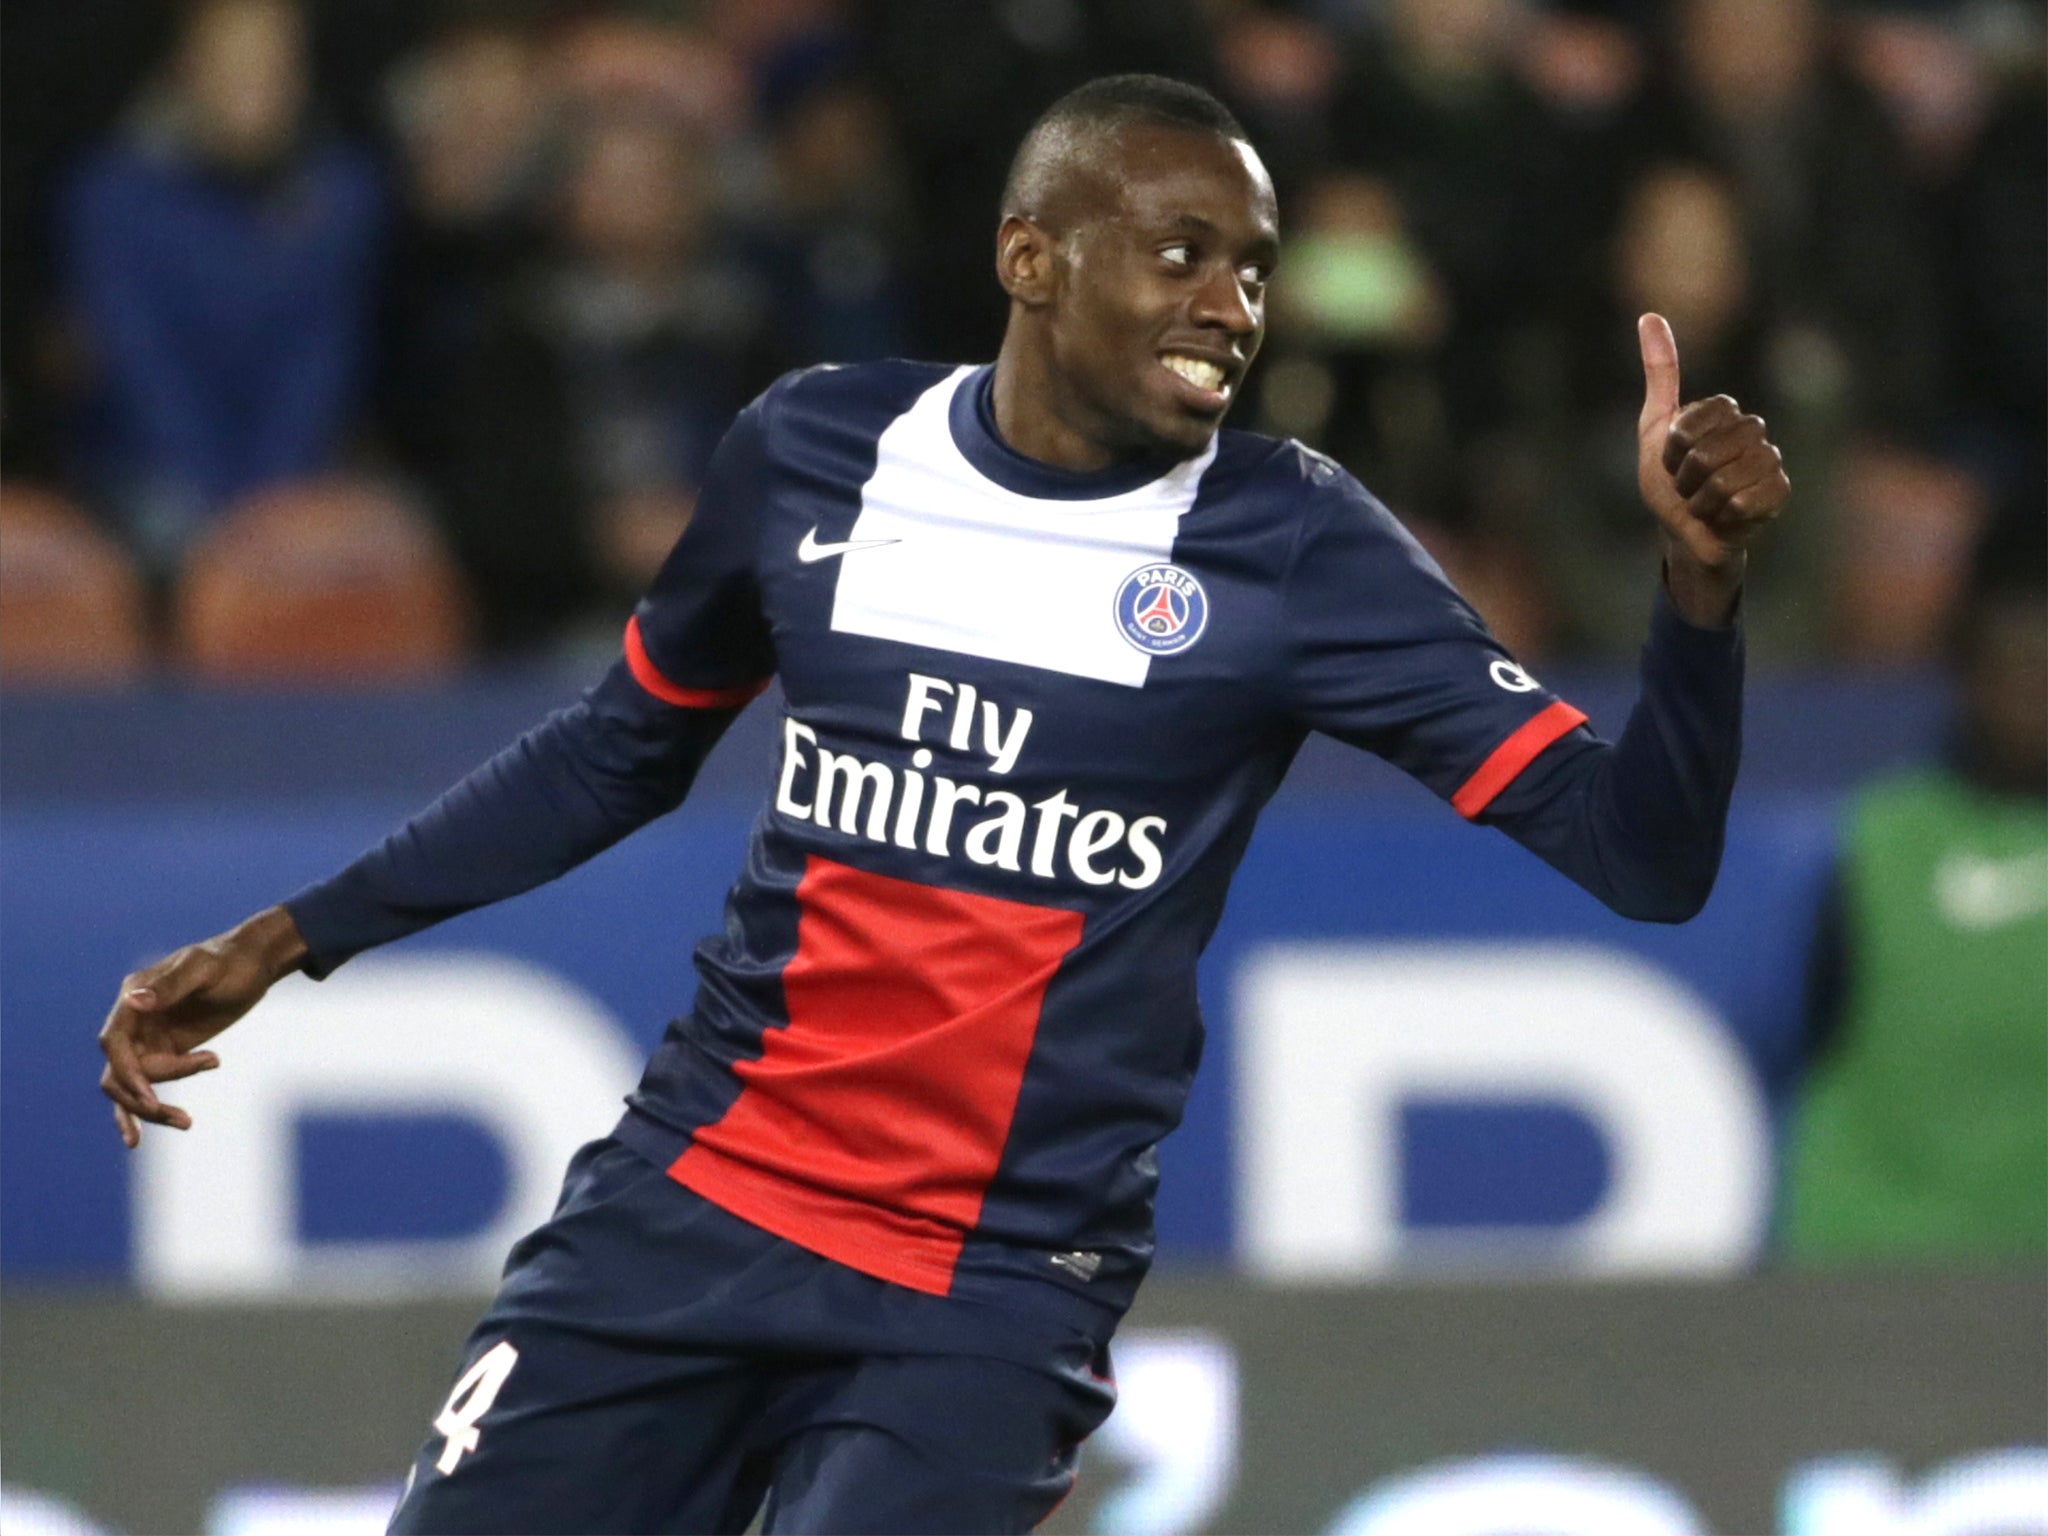 Midfielder Blaise Matuidi believes the experience of playing together has made PSG a better team than last year